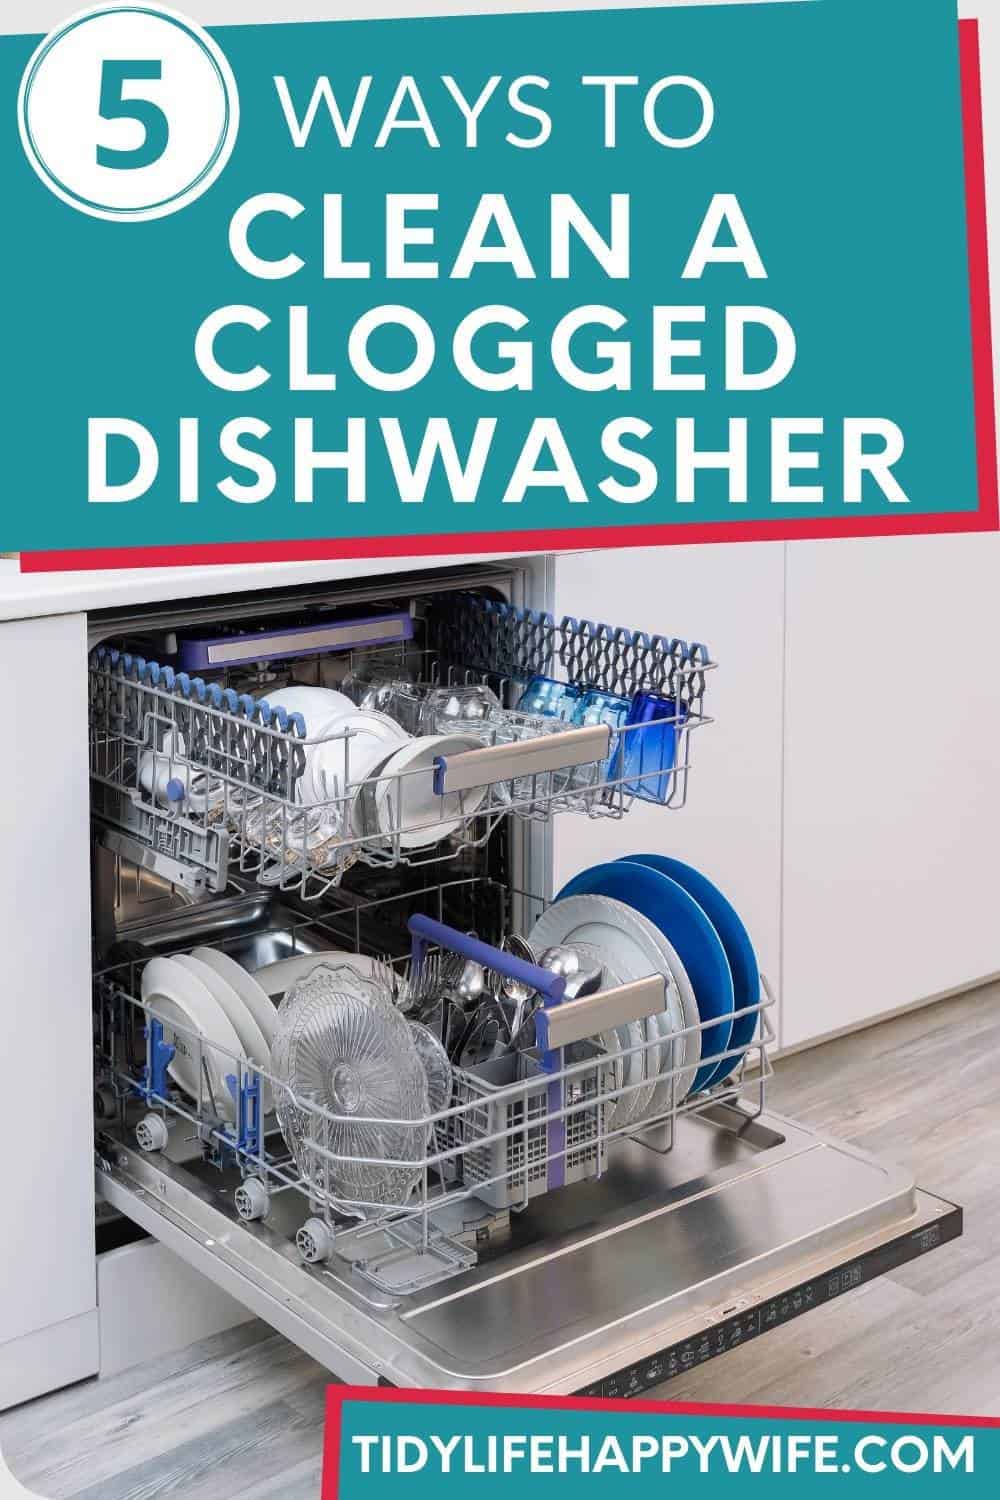 Does your dishwasher have a bad odor and bits of food in the bottom after the cycle? You might need to clean out the filter and drain hoses. Here are 5 ways to can clean the clog yourself. via @Tidylifehappywife